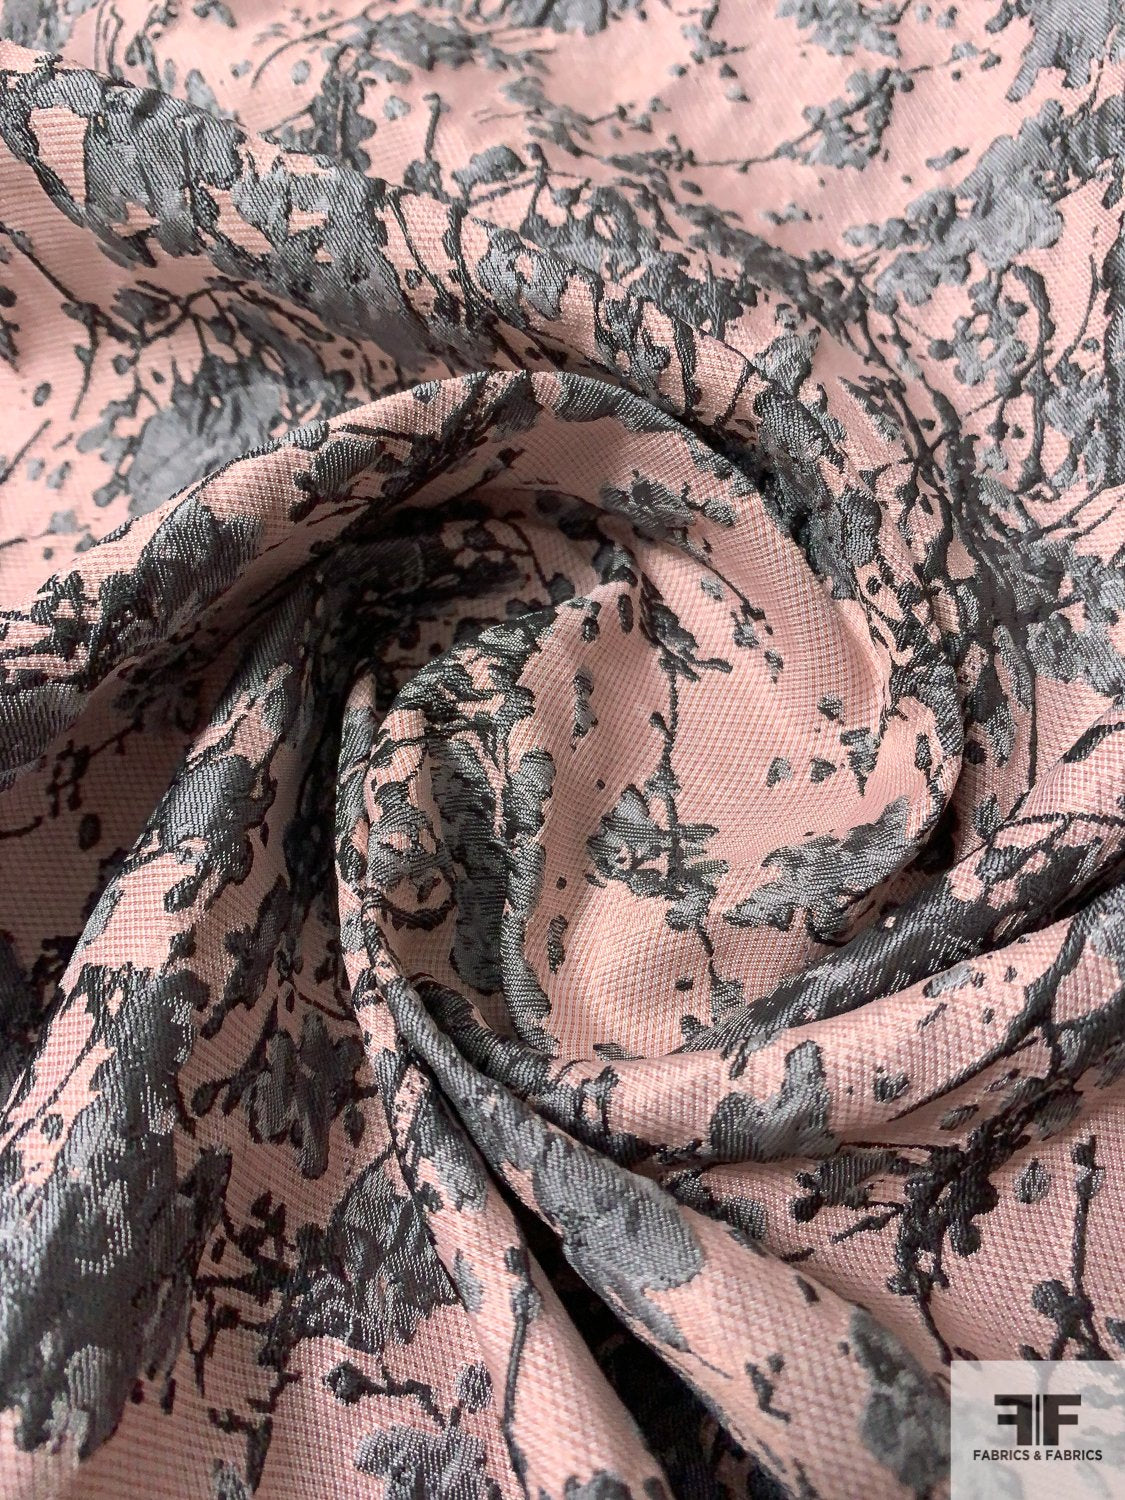 Rose Pink and Gold Scarf in Brocade Silk